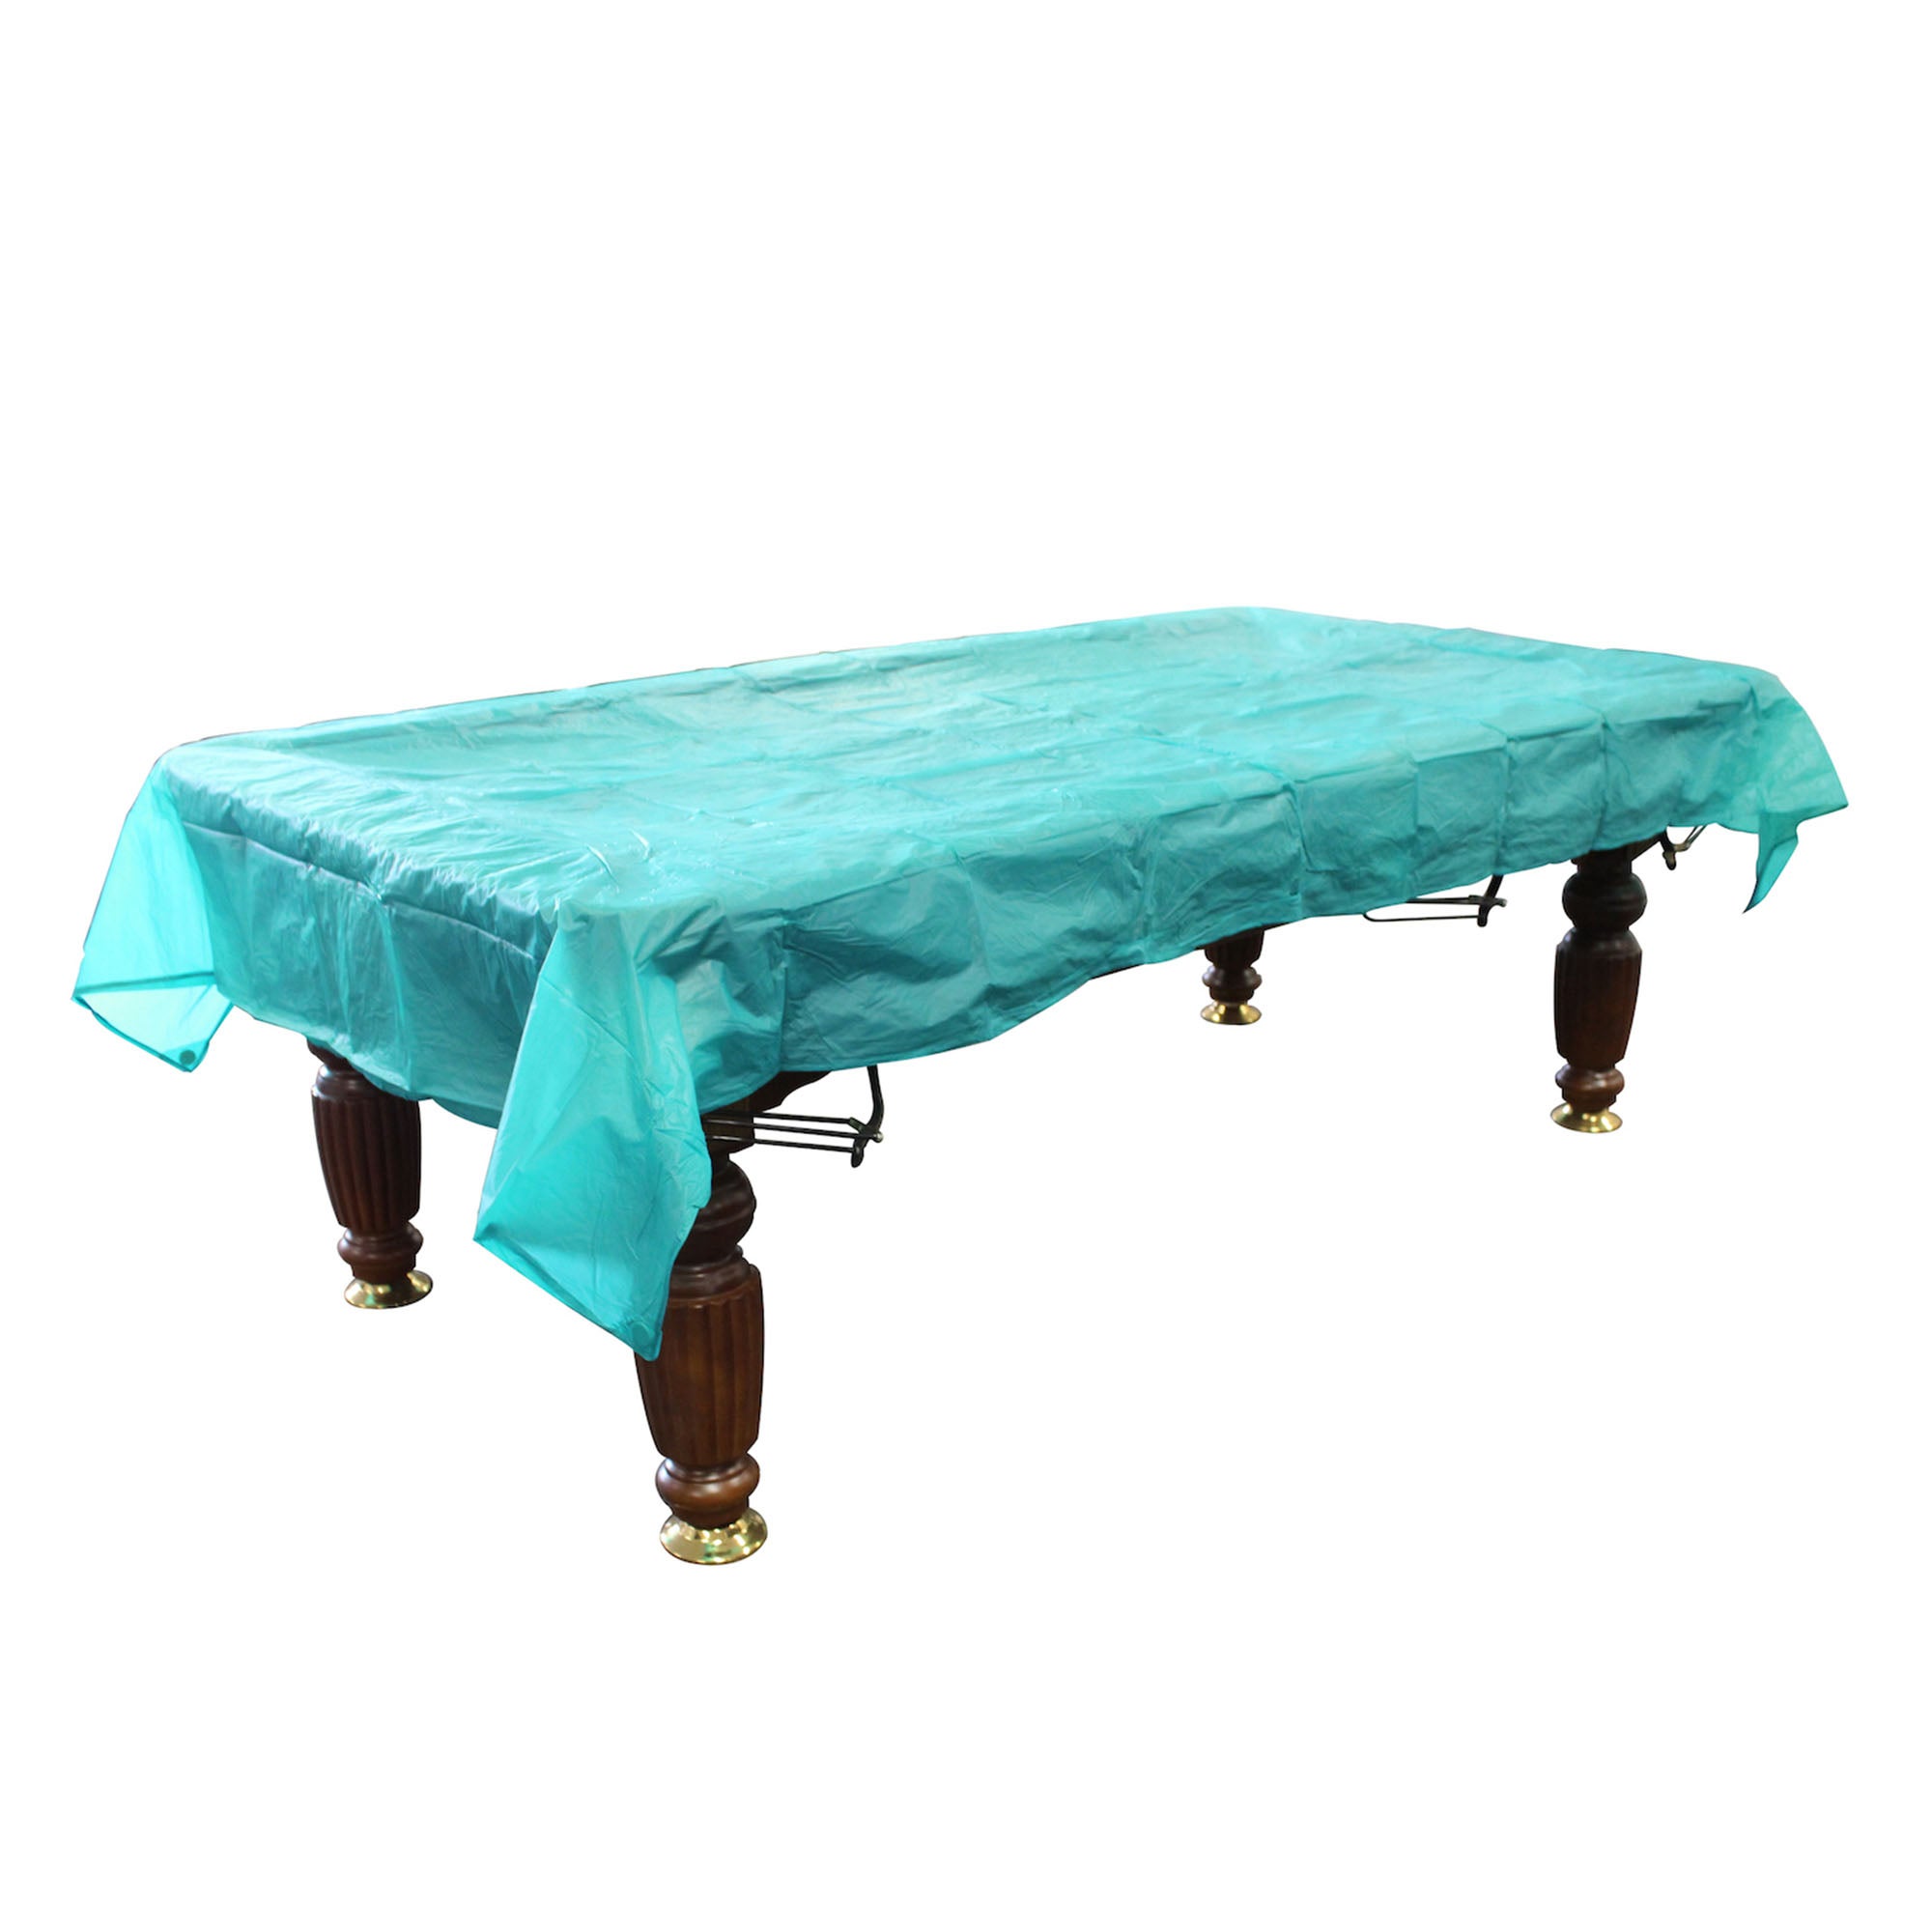 T&R SPORTS 8FT Billiard Table Cover Billiard Pool Table Cover Weighted Corners - Blue